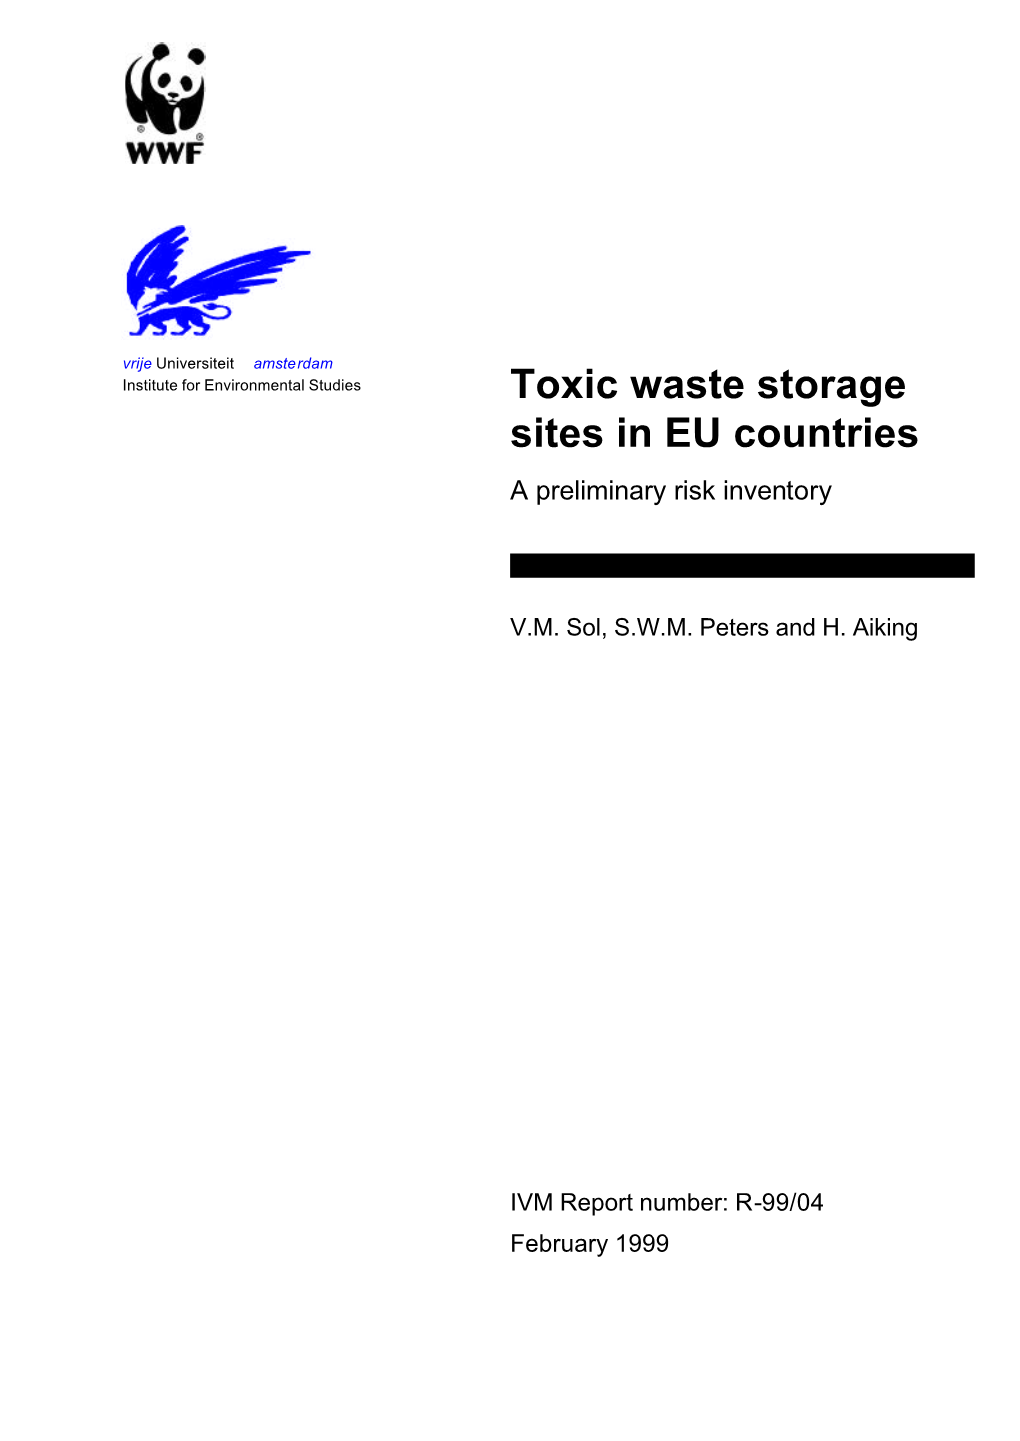 Toxic Waste Storage Sites in EU Countries a Preliminary Risk Inventory